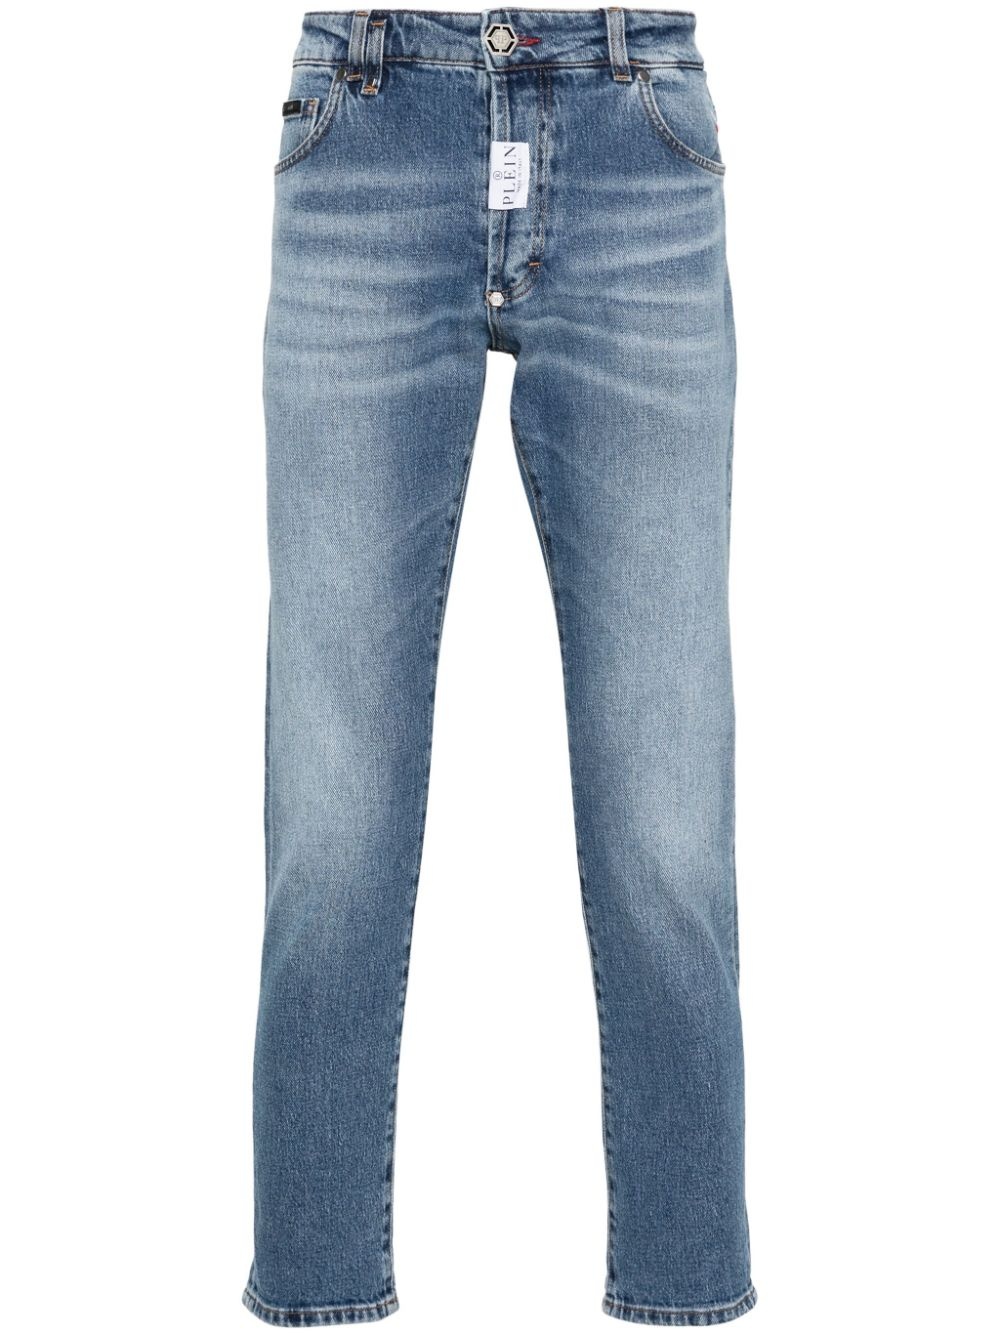 mid-rise skinny jeans - 1